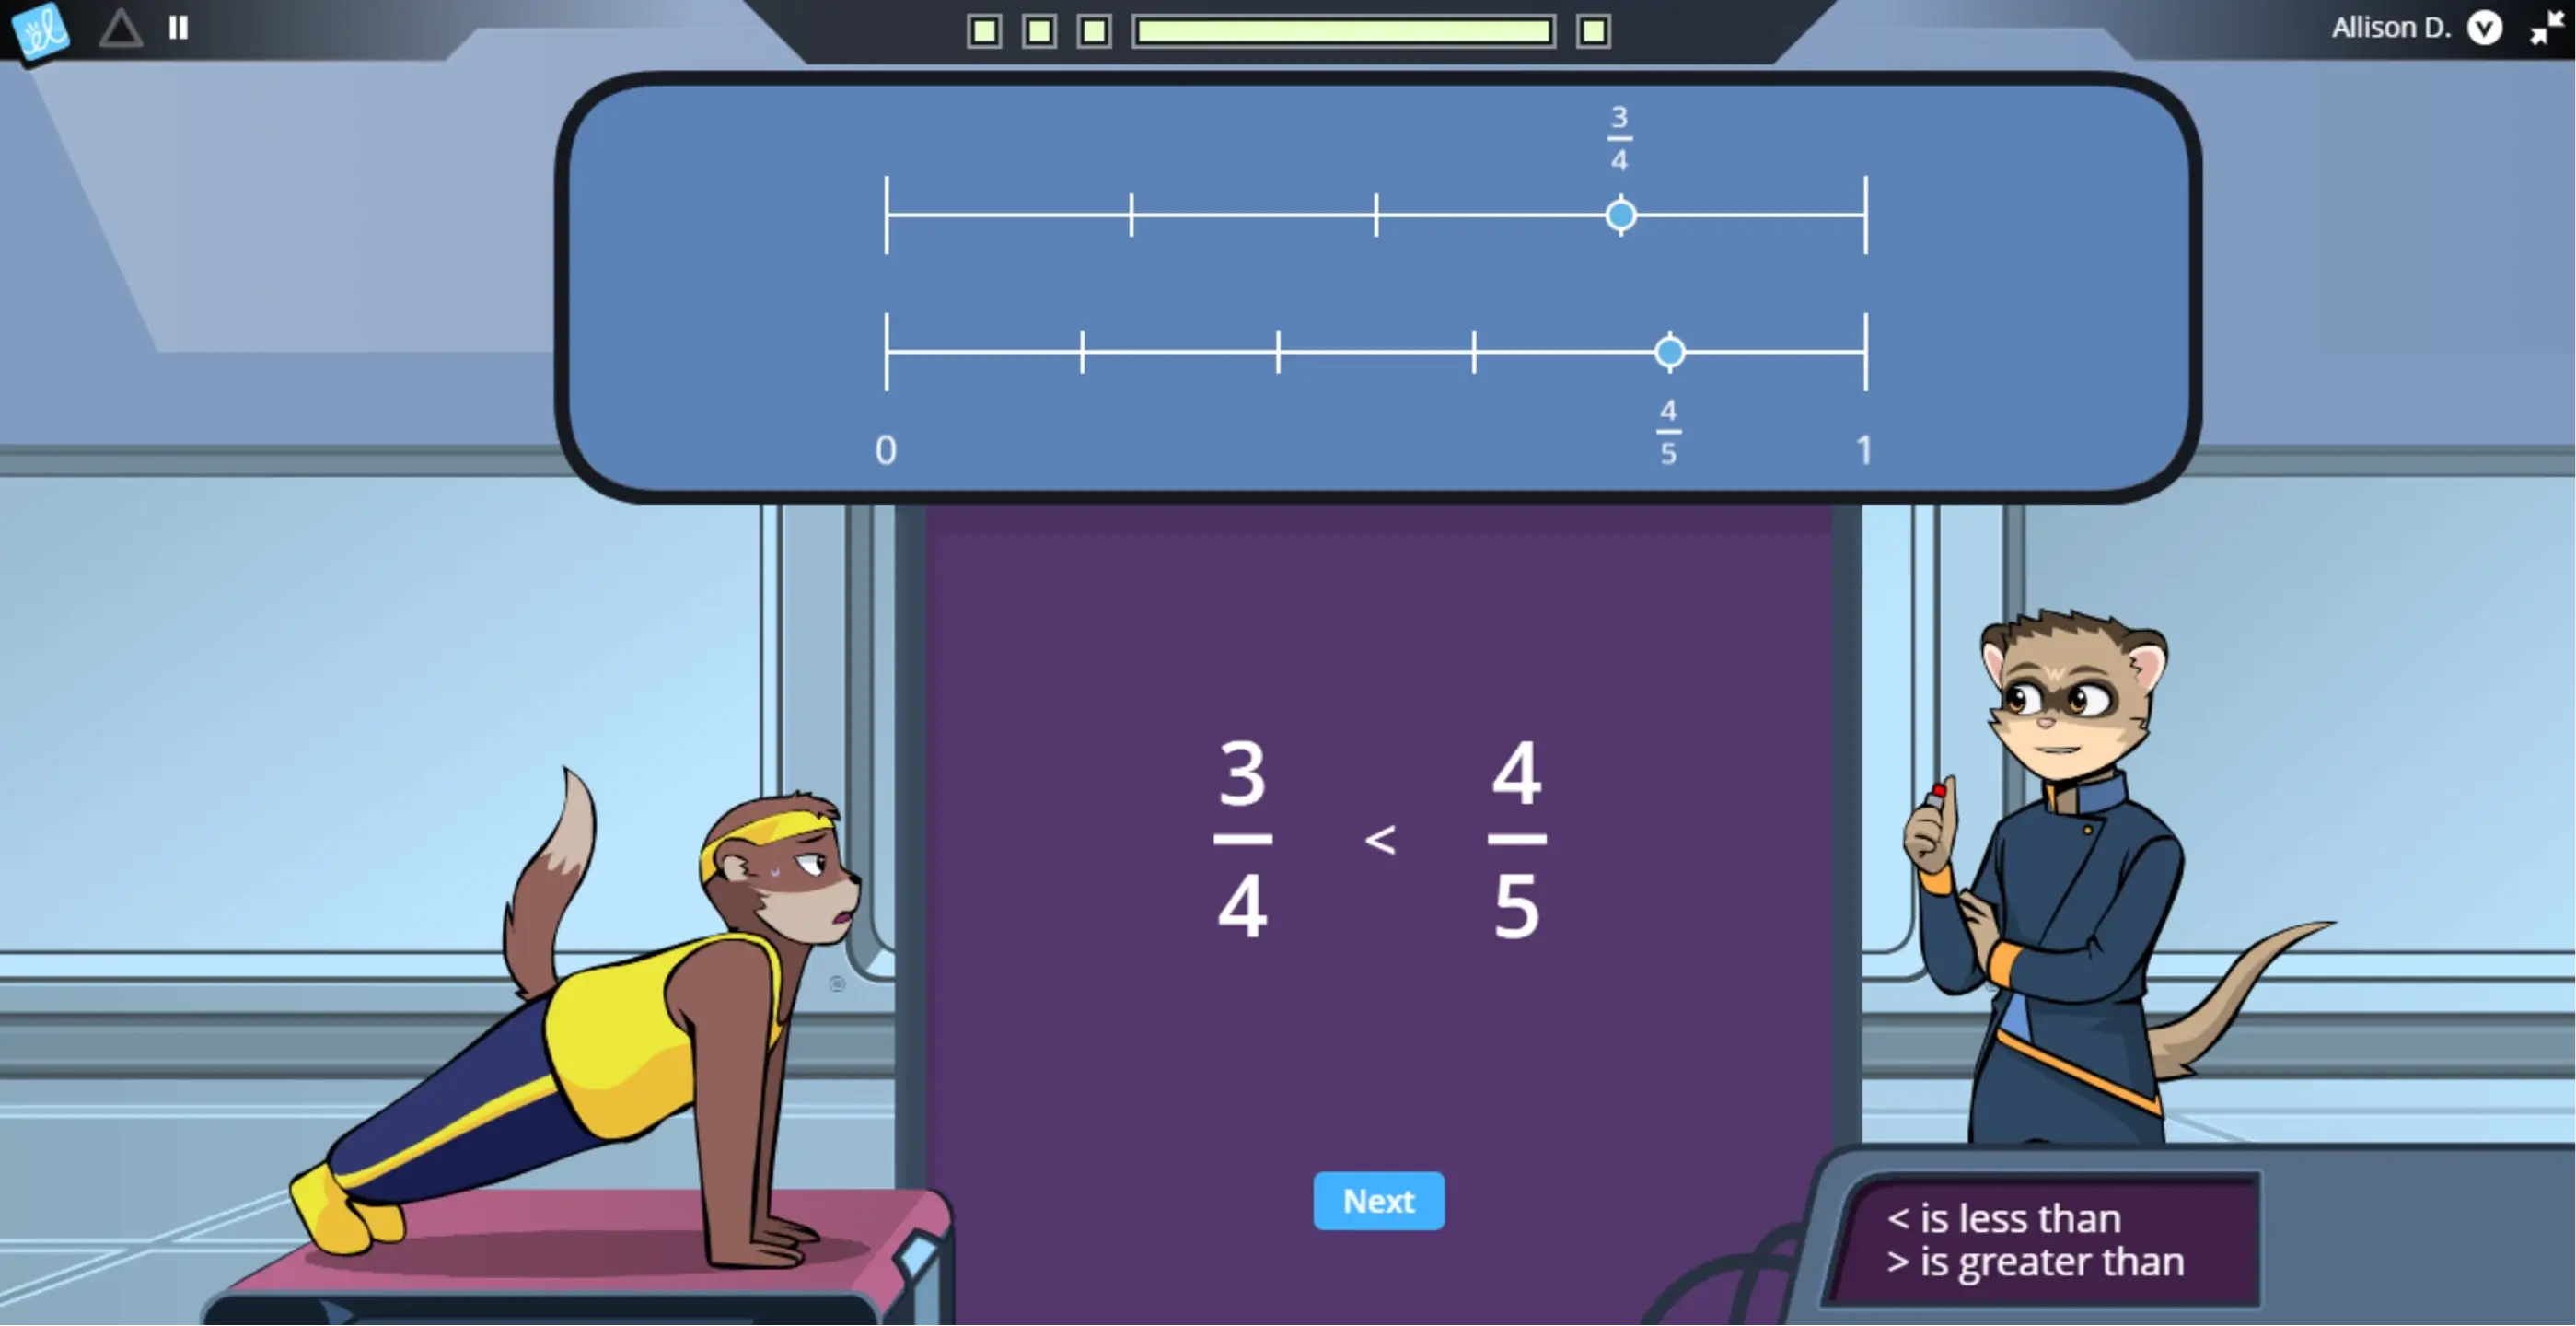 game play of ExploreLearning Frax showing value denominators